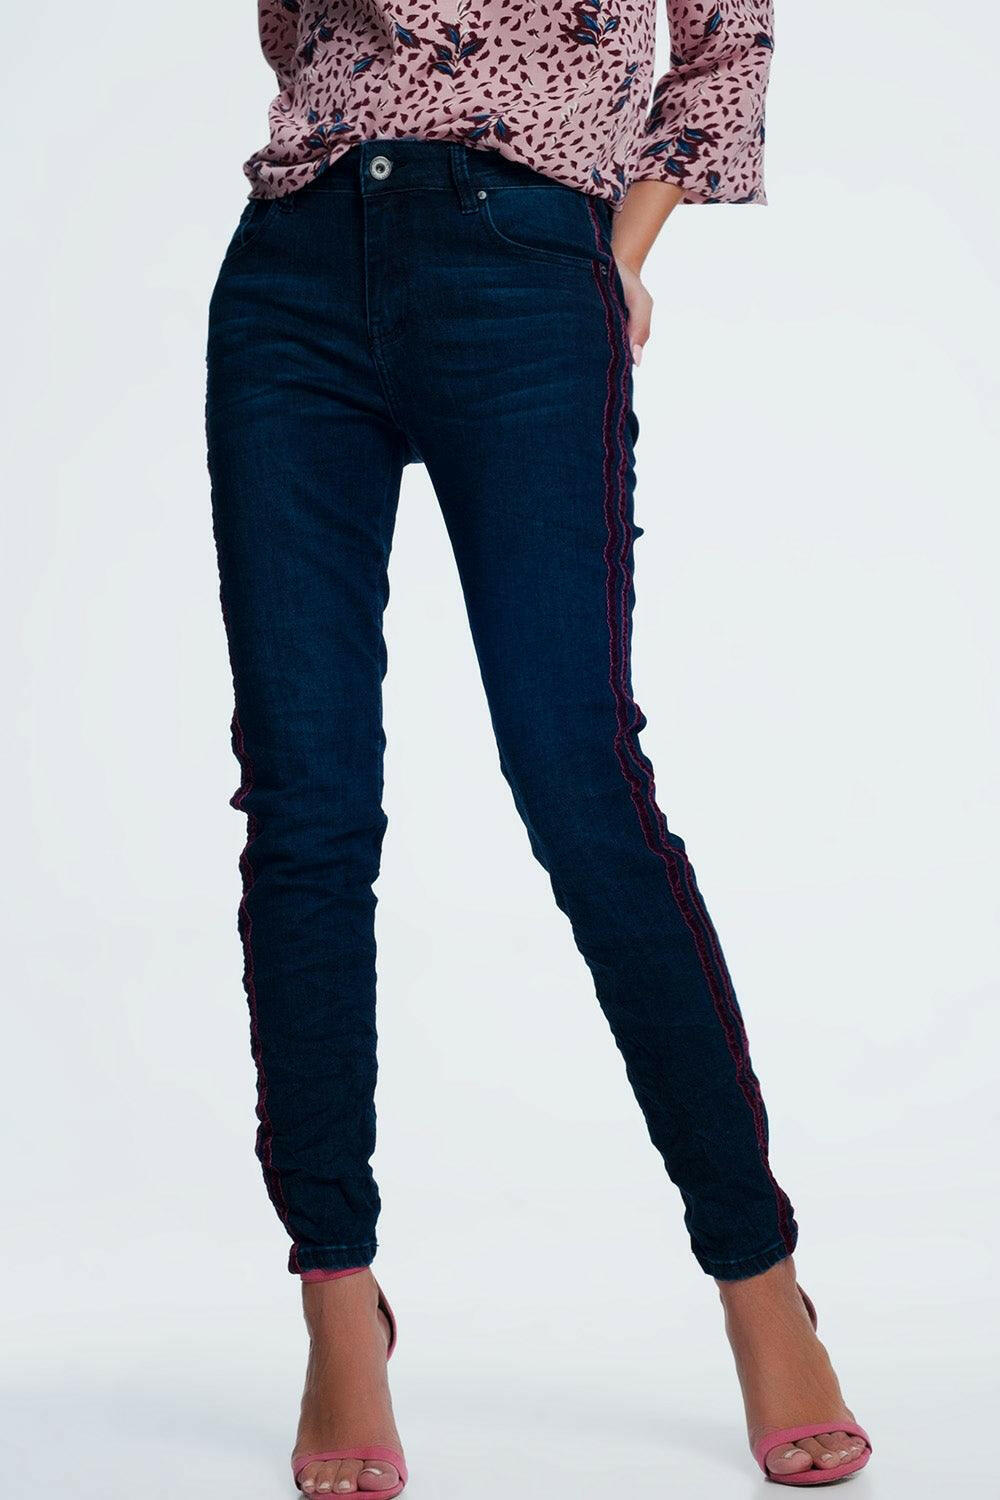 Skinny Jeans With Sports Red Stripes - GENUINE AUTHENTIC BRAND LLC